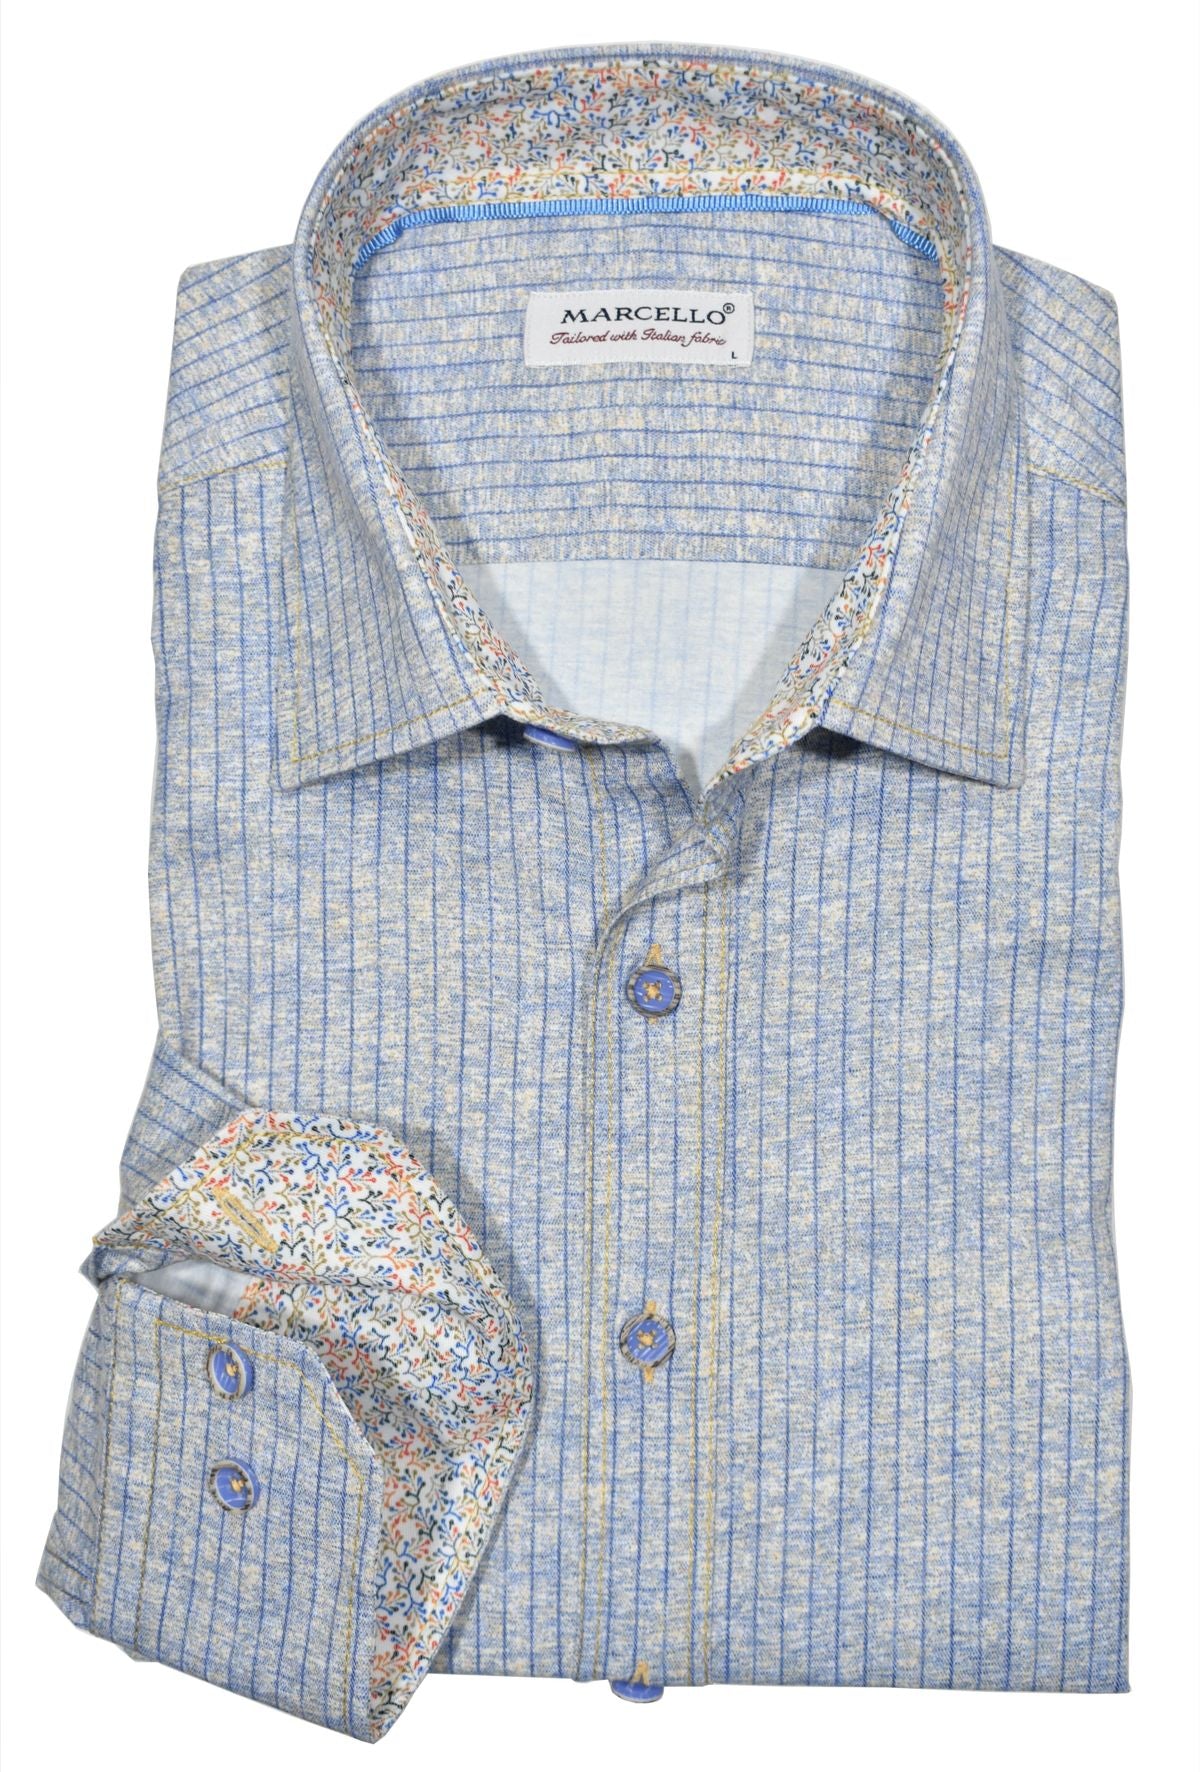 Our W802 Boardwalk shirt is the ultimate lightweight comfort. Perfect for hot days, it features a soft maize melange ground with a subtle medium blue over print and stripe. The shirt also features cool trim fabric, perfectly matched buttons, and contrast color stitch detailing for an extra touch of style. Enjoy effortless summer comfort with this must-have seasonal essential. Shirt by Marcello.